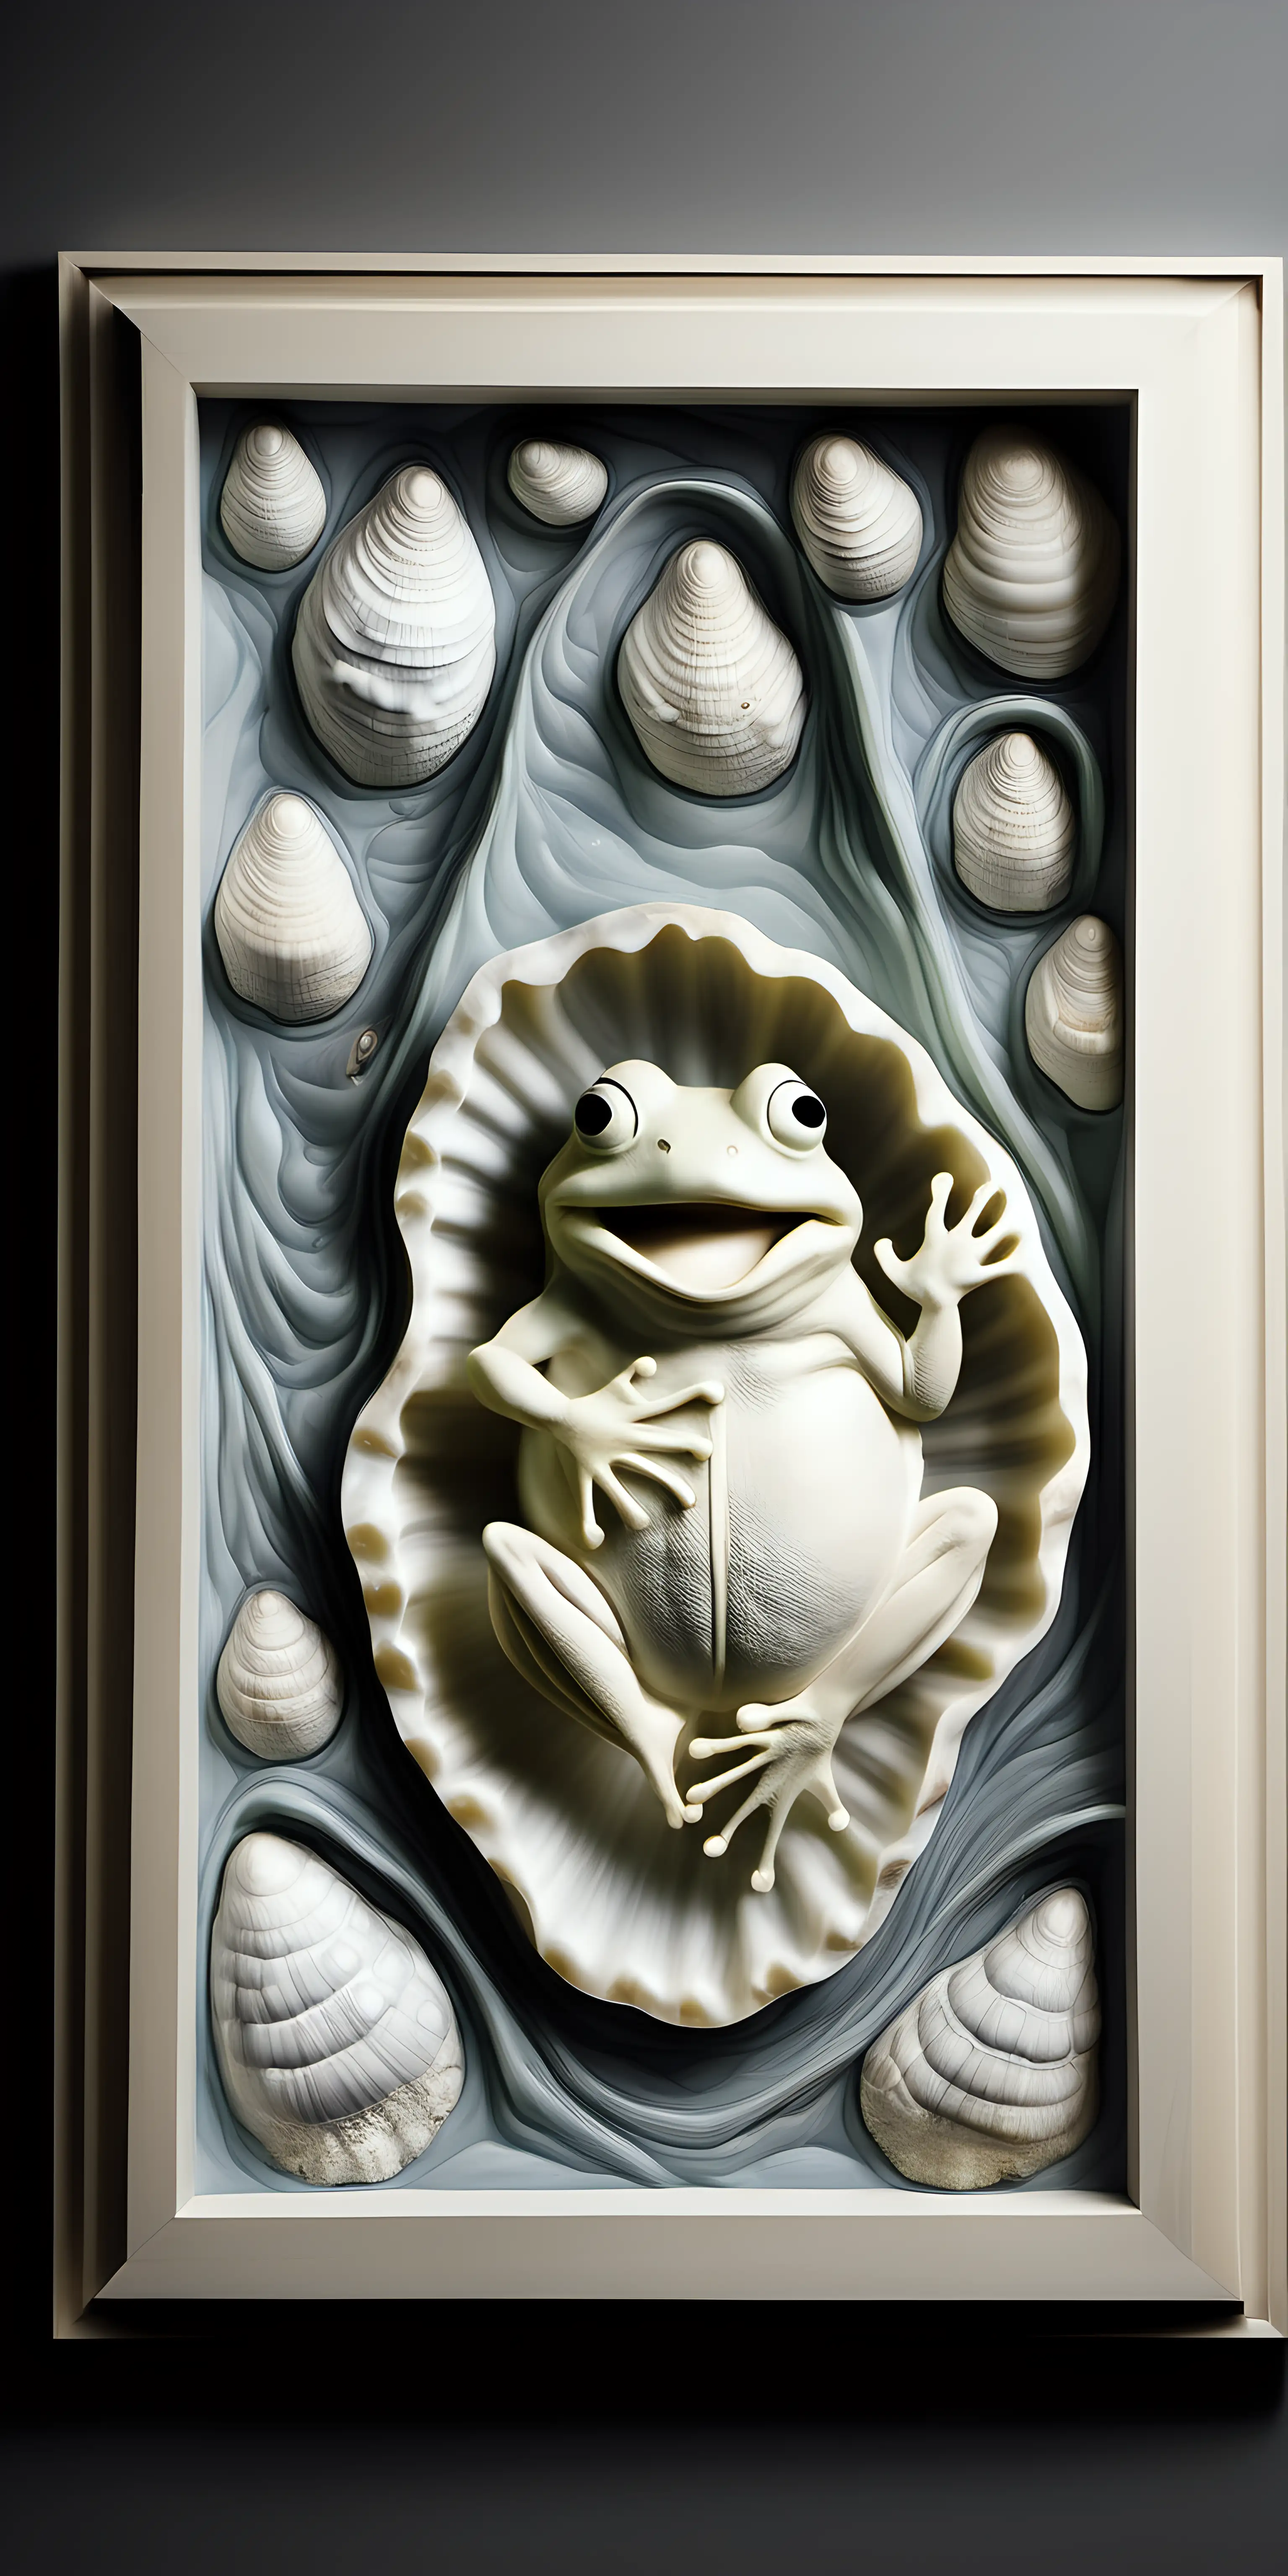 framed sign, with a animated smiling frog, big oyster shell in the background,carved in translucent white chocolate, 3d relief, topographical gray scale